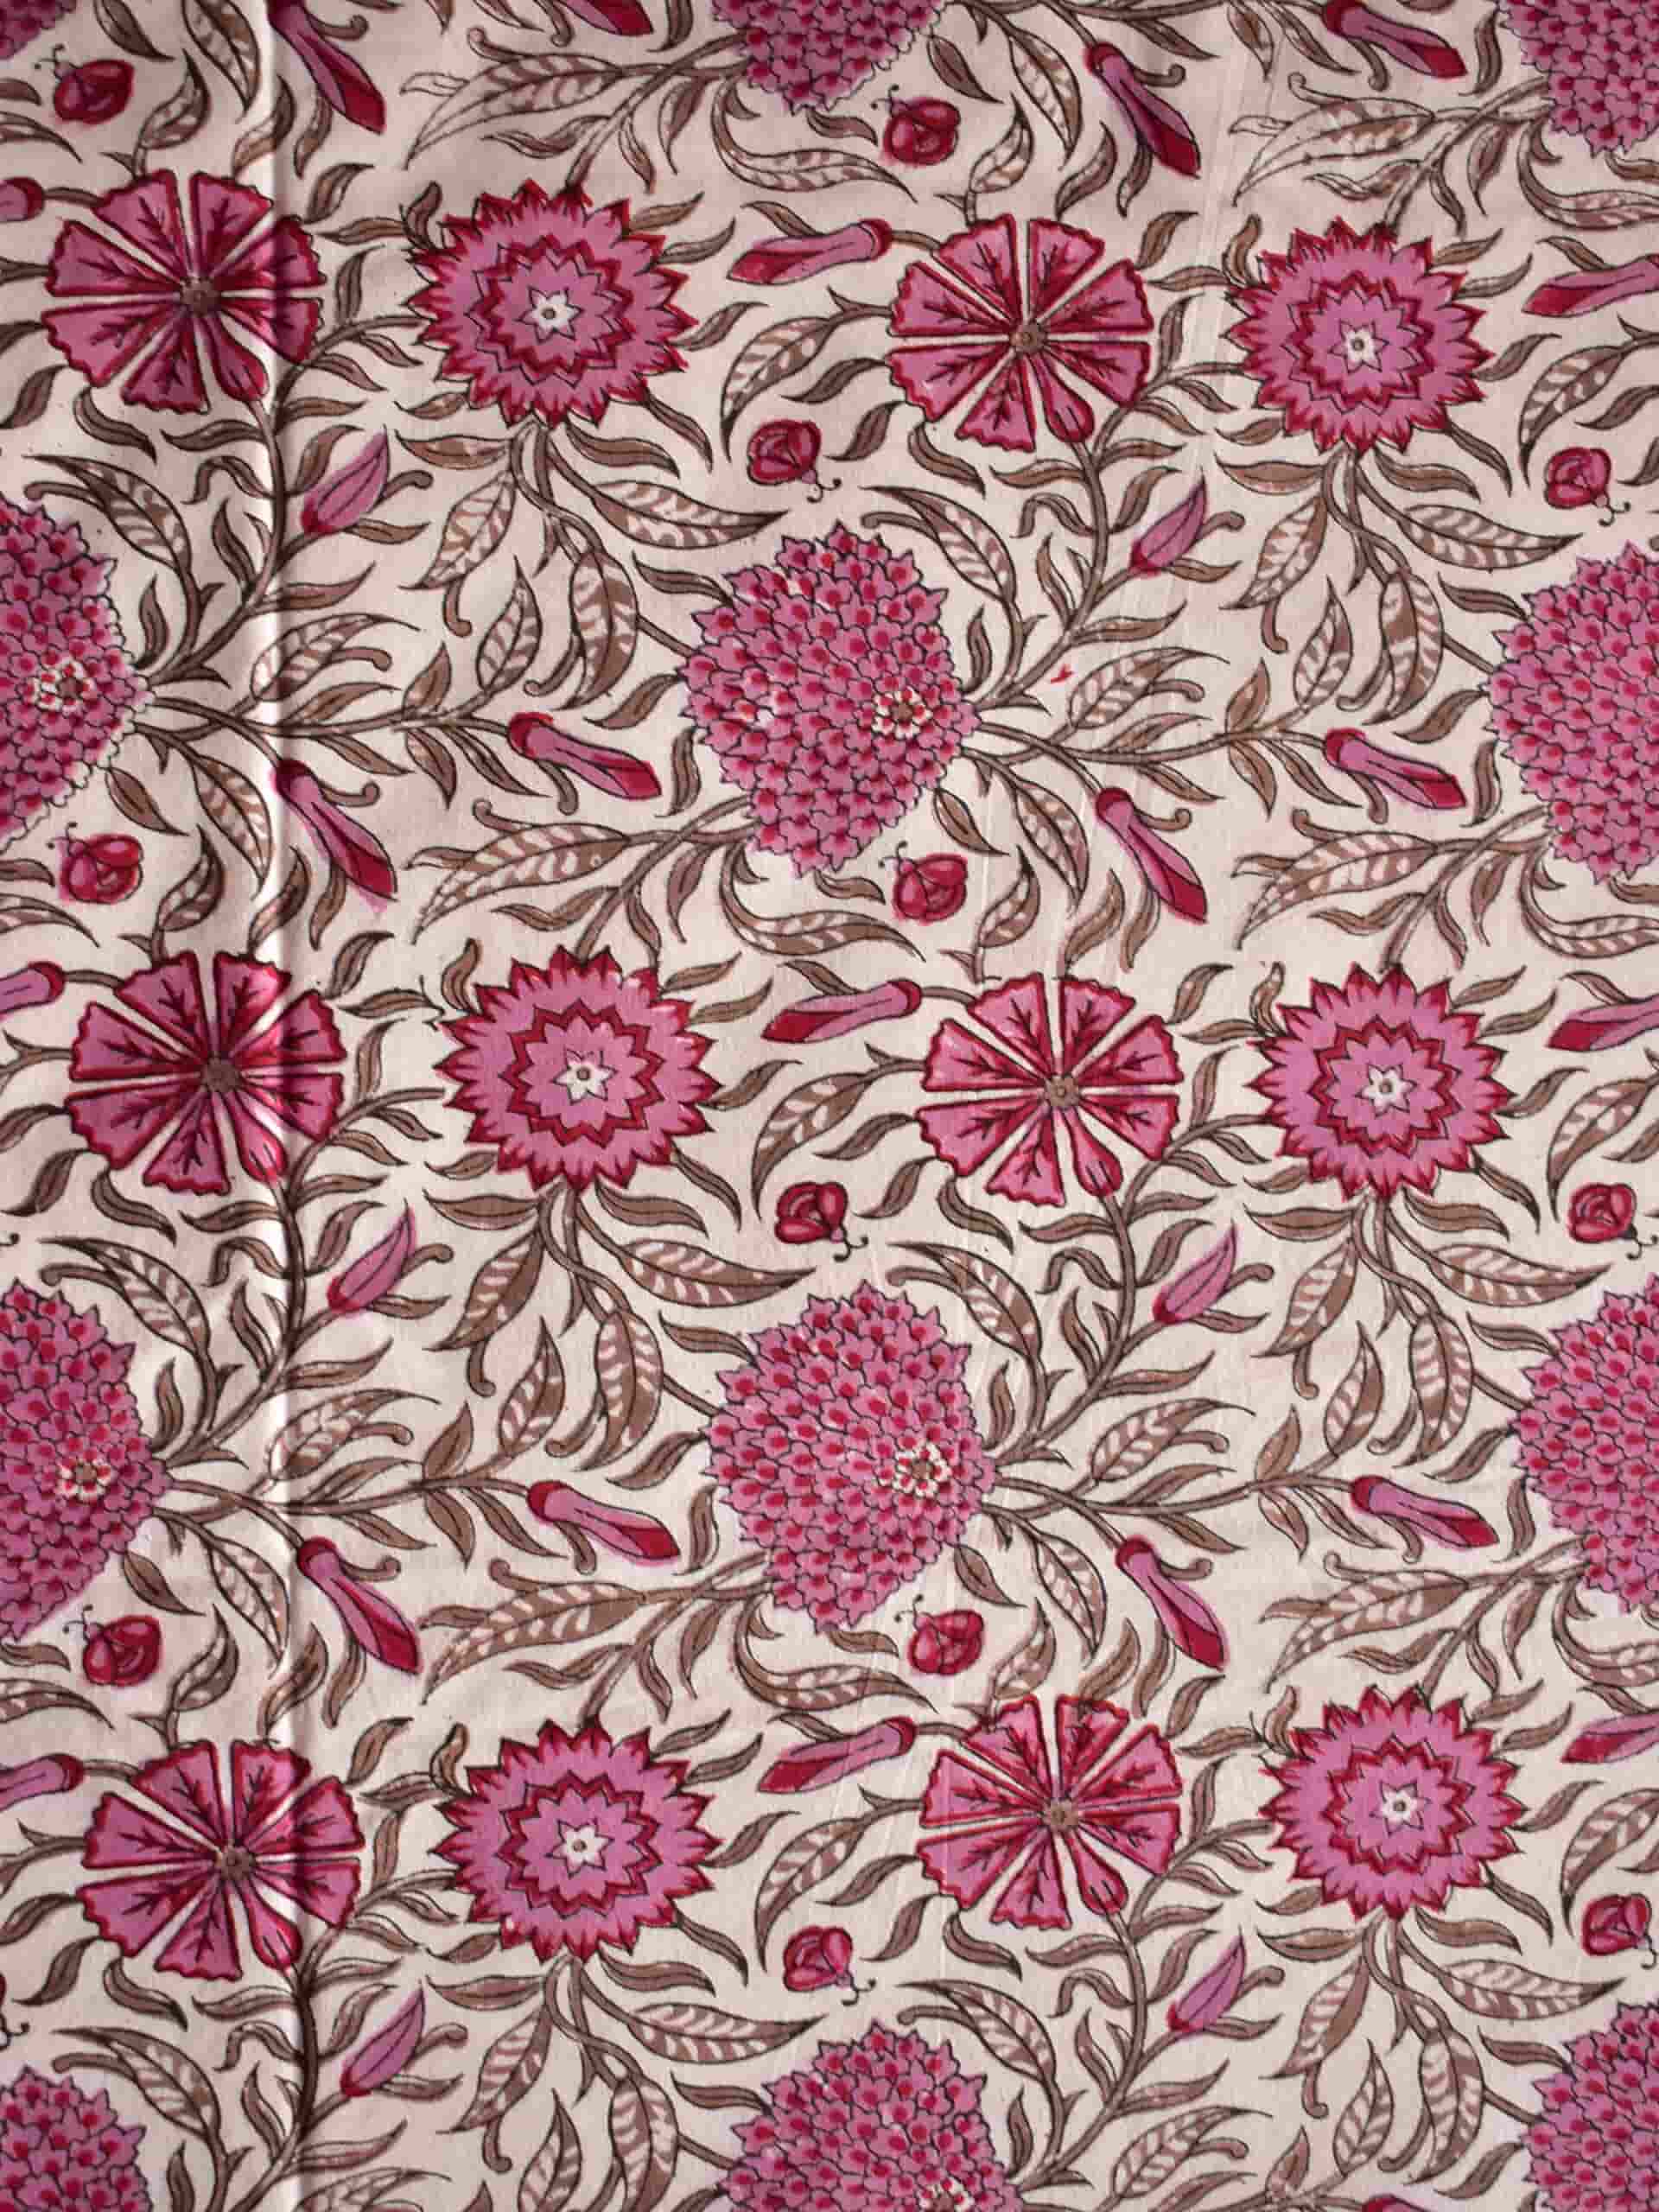 Rubies - Hand block printed COTTON DOUBLE BEDSHEET WITH PILLOW COVERS